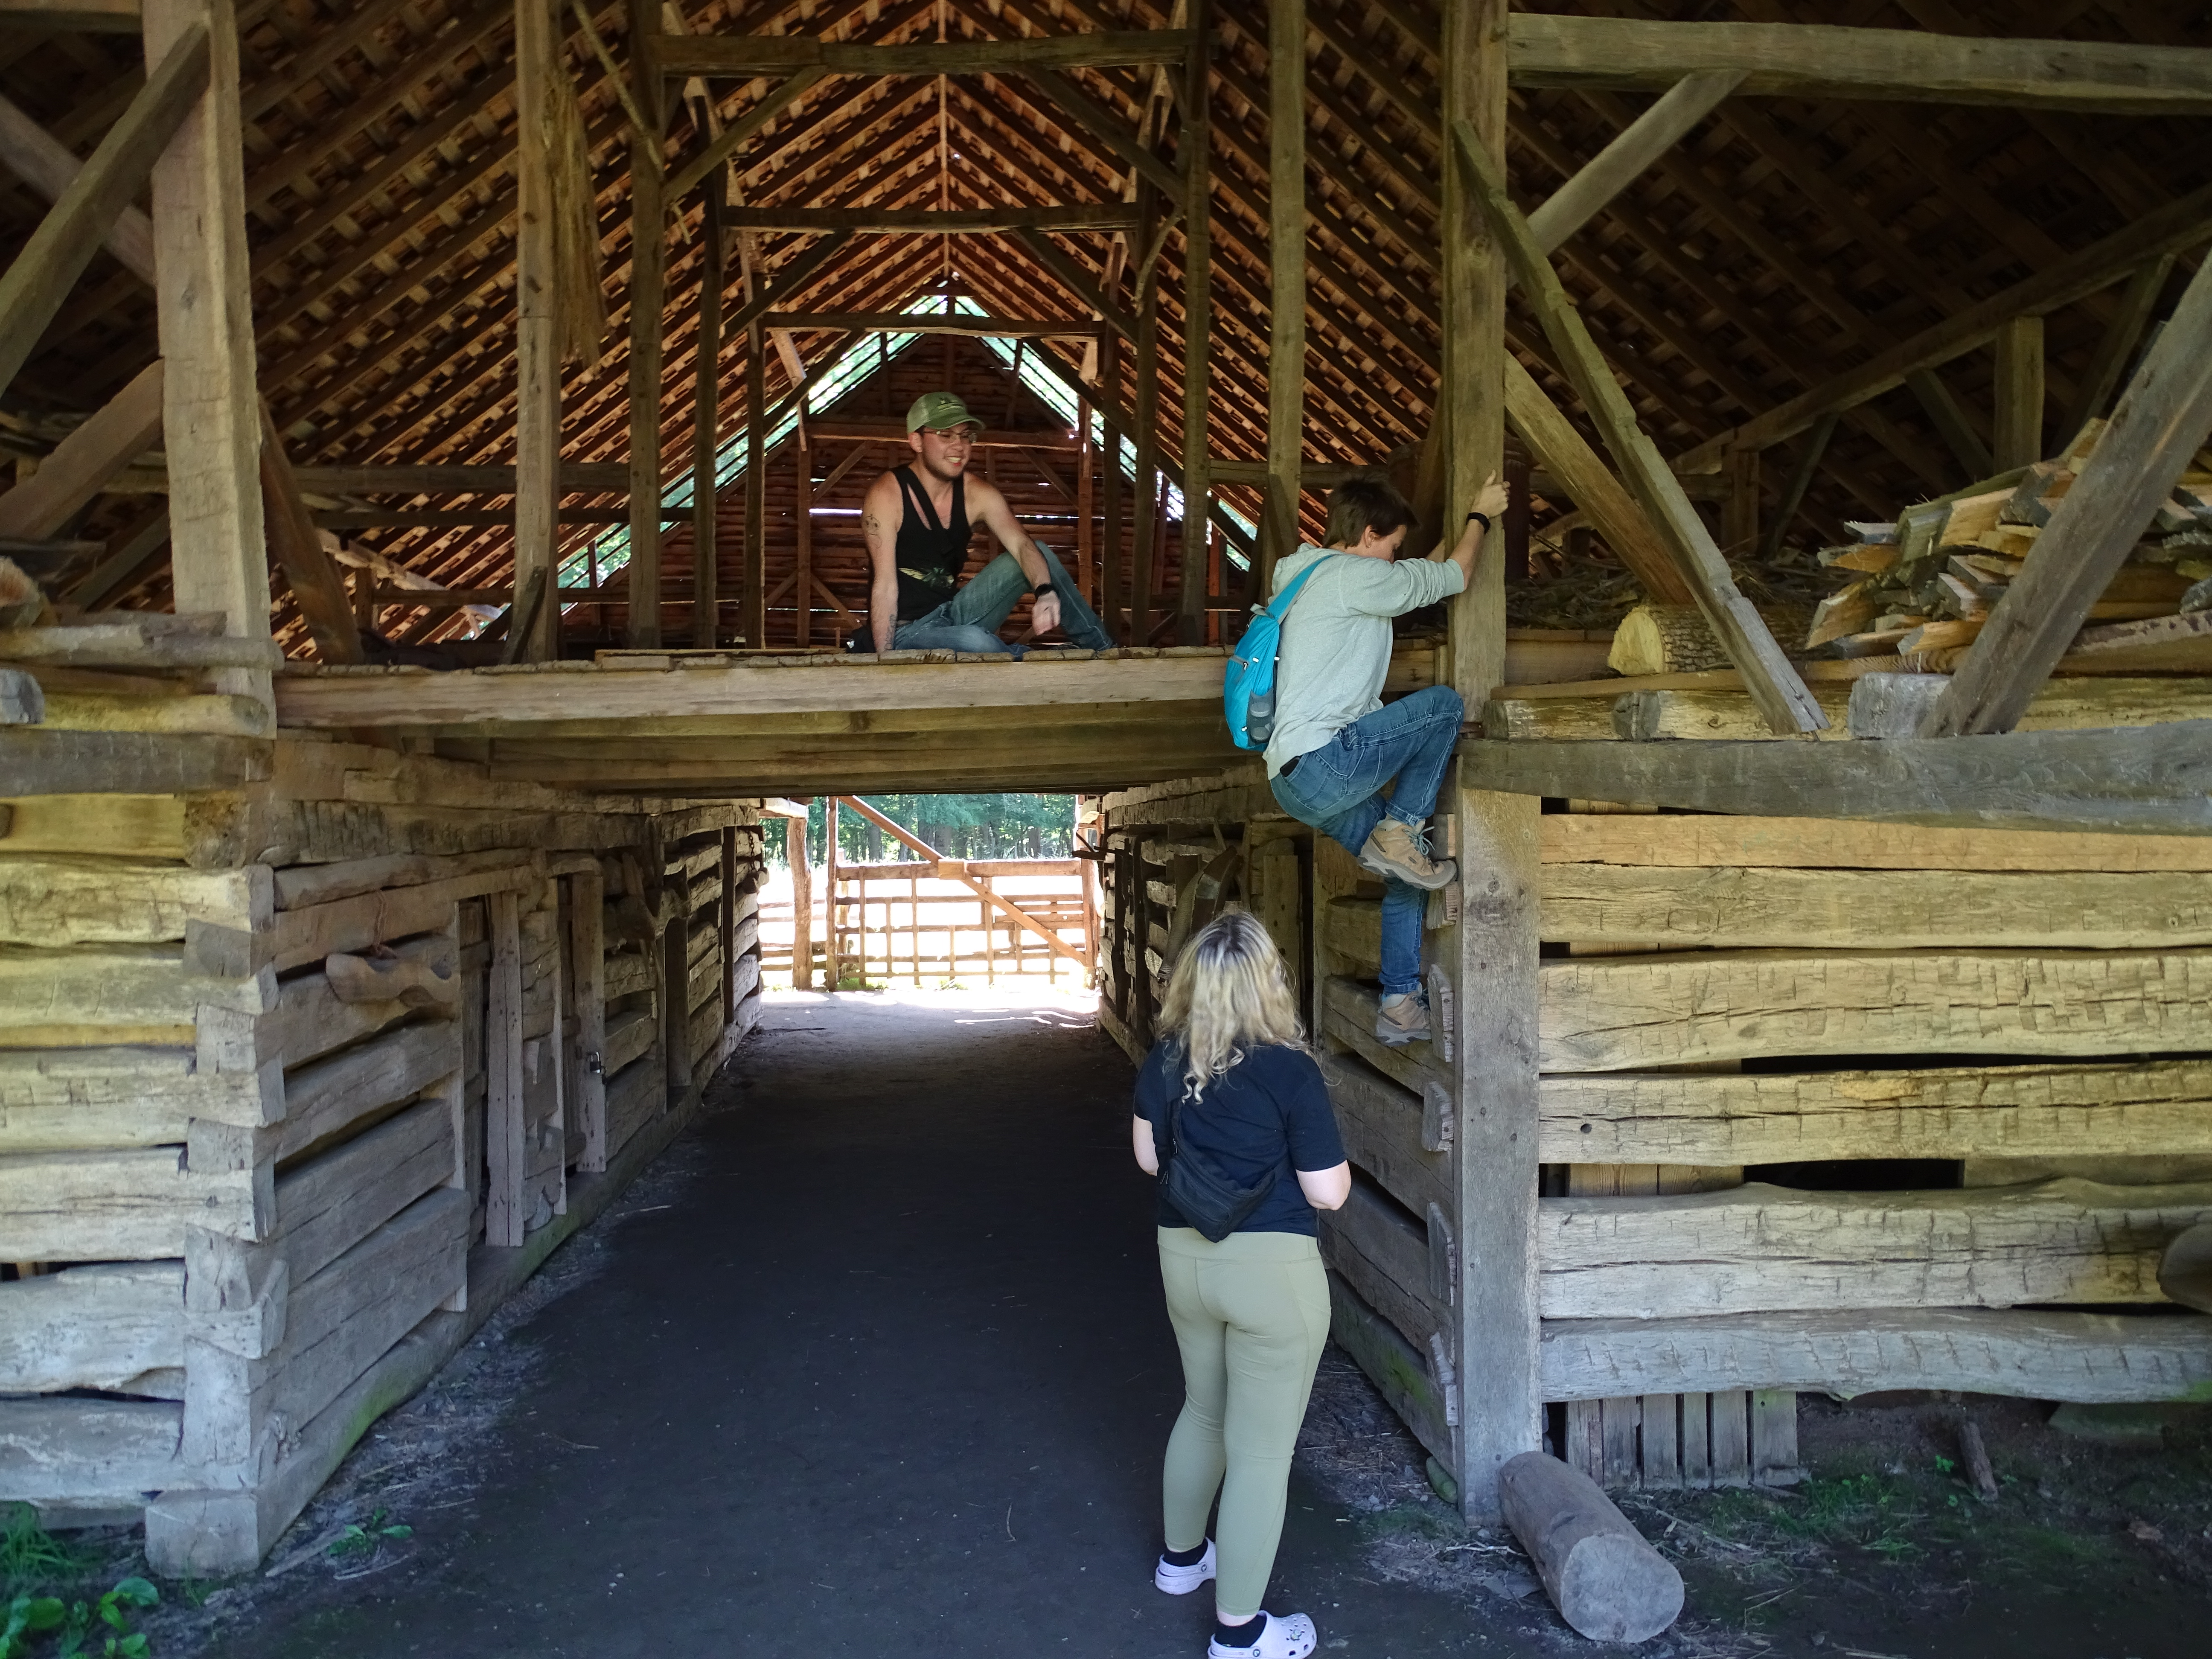 looking at a barn with a hay loft. One person is climbing up a wall to get to the loft, one person is sitting in the loft, and one person is standing on the ground watching the climber.